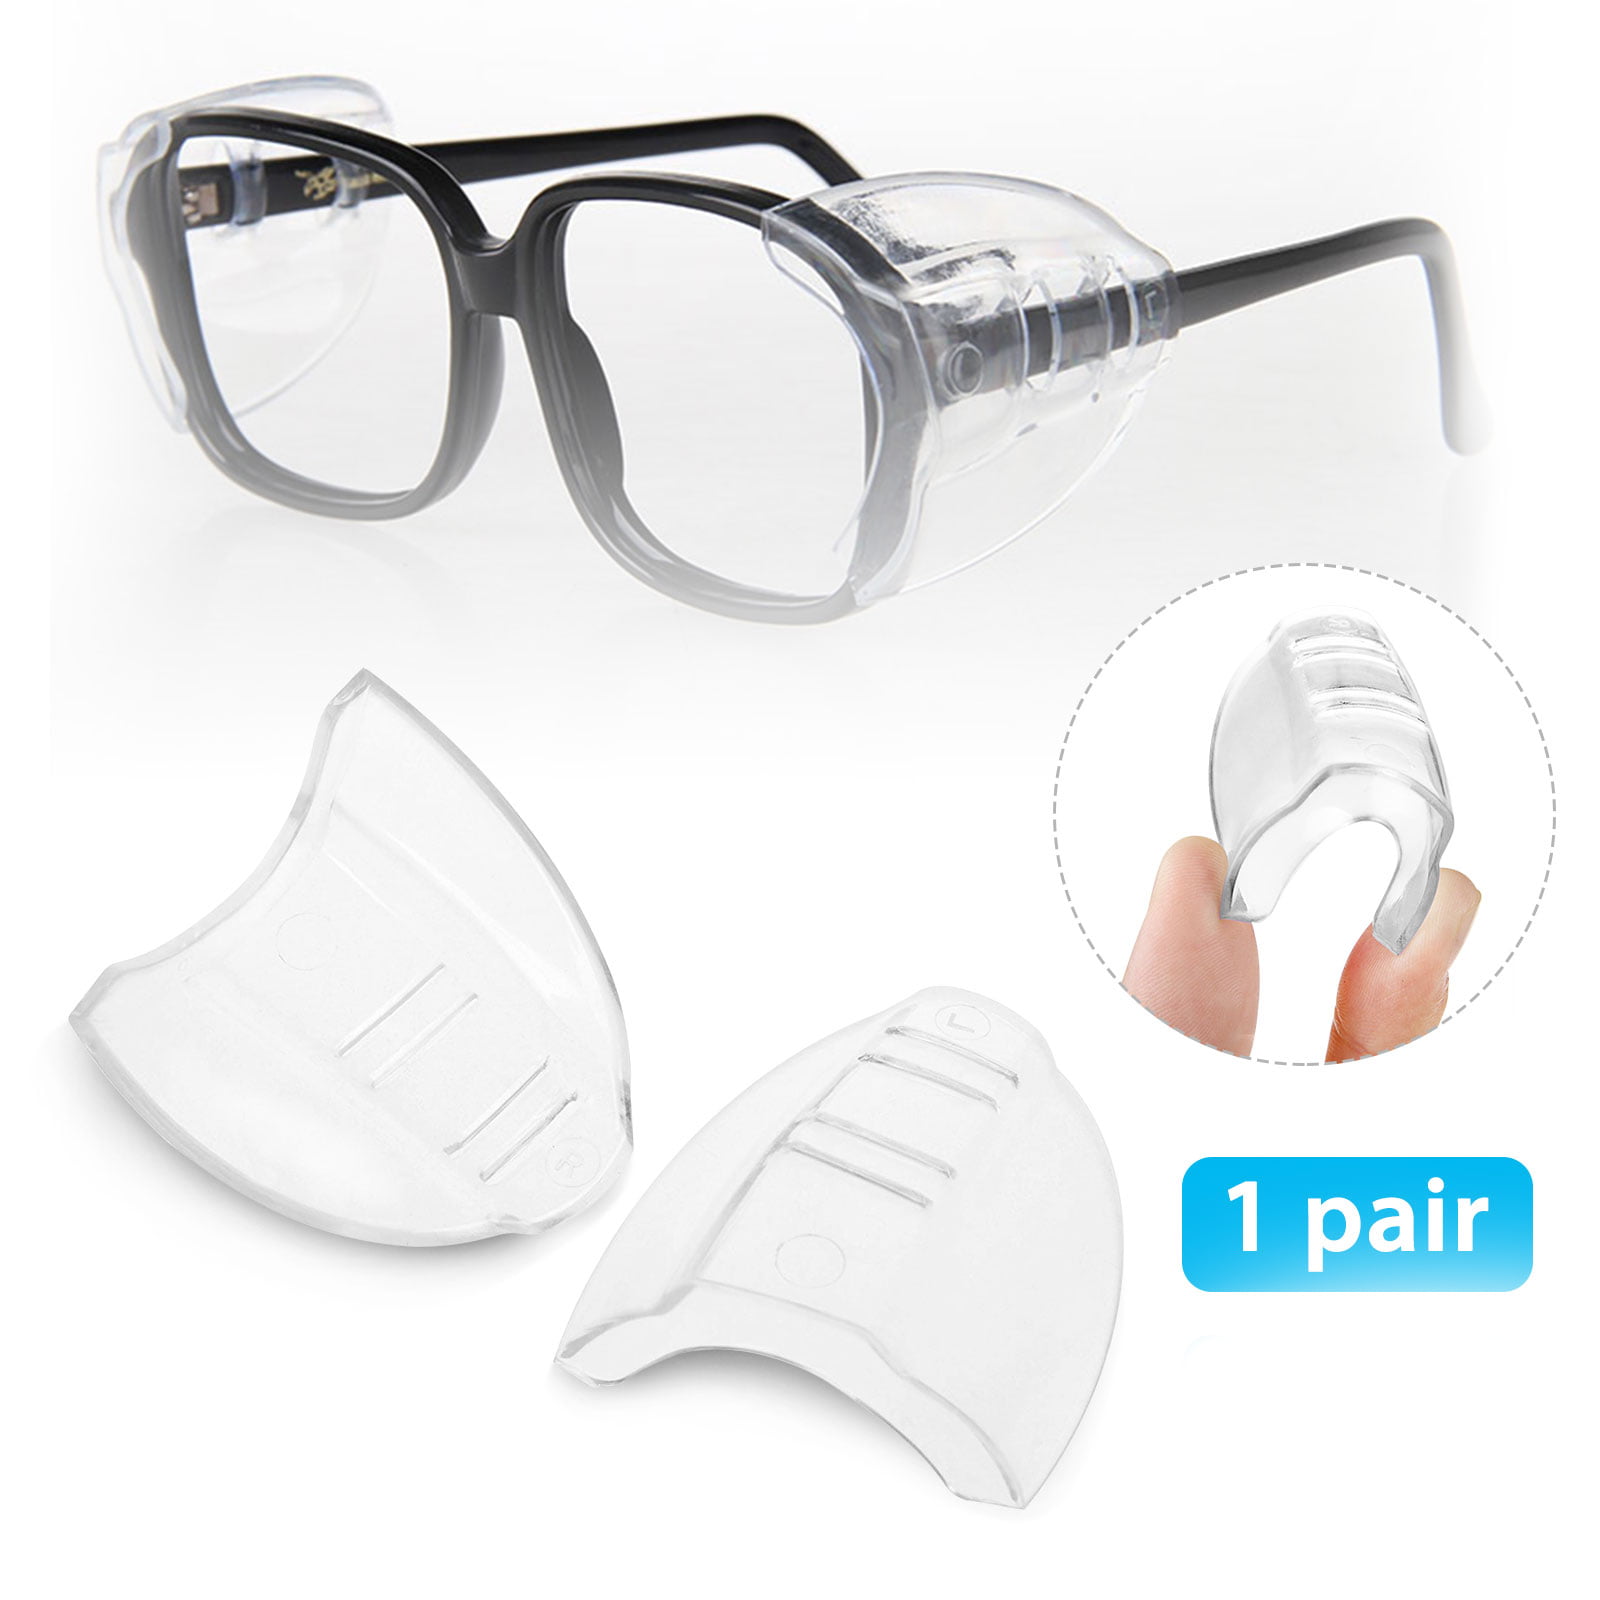 One Pair Slip On Clear Side Shields For Safety Glasses Safety Glasses Side Shields Fits Small 